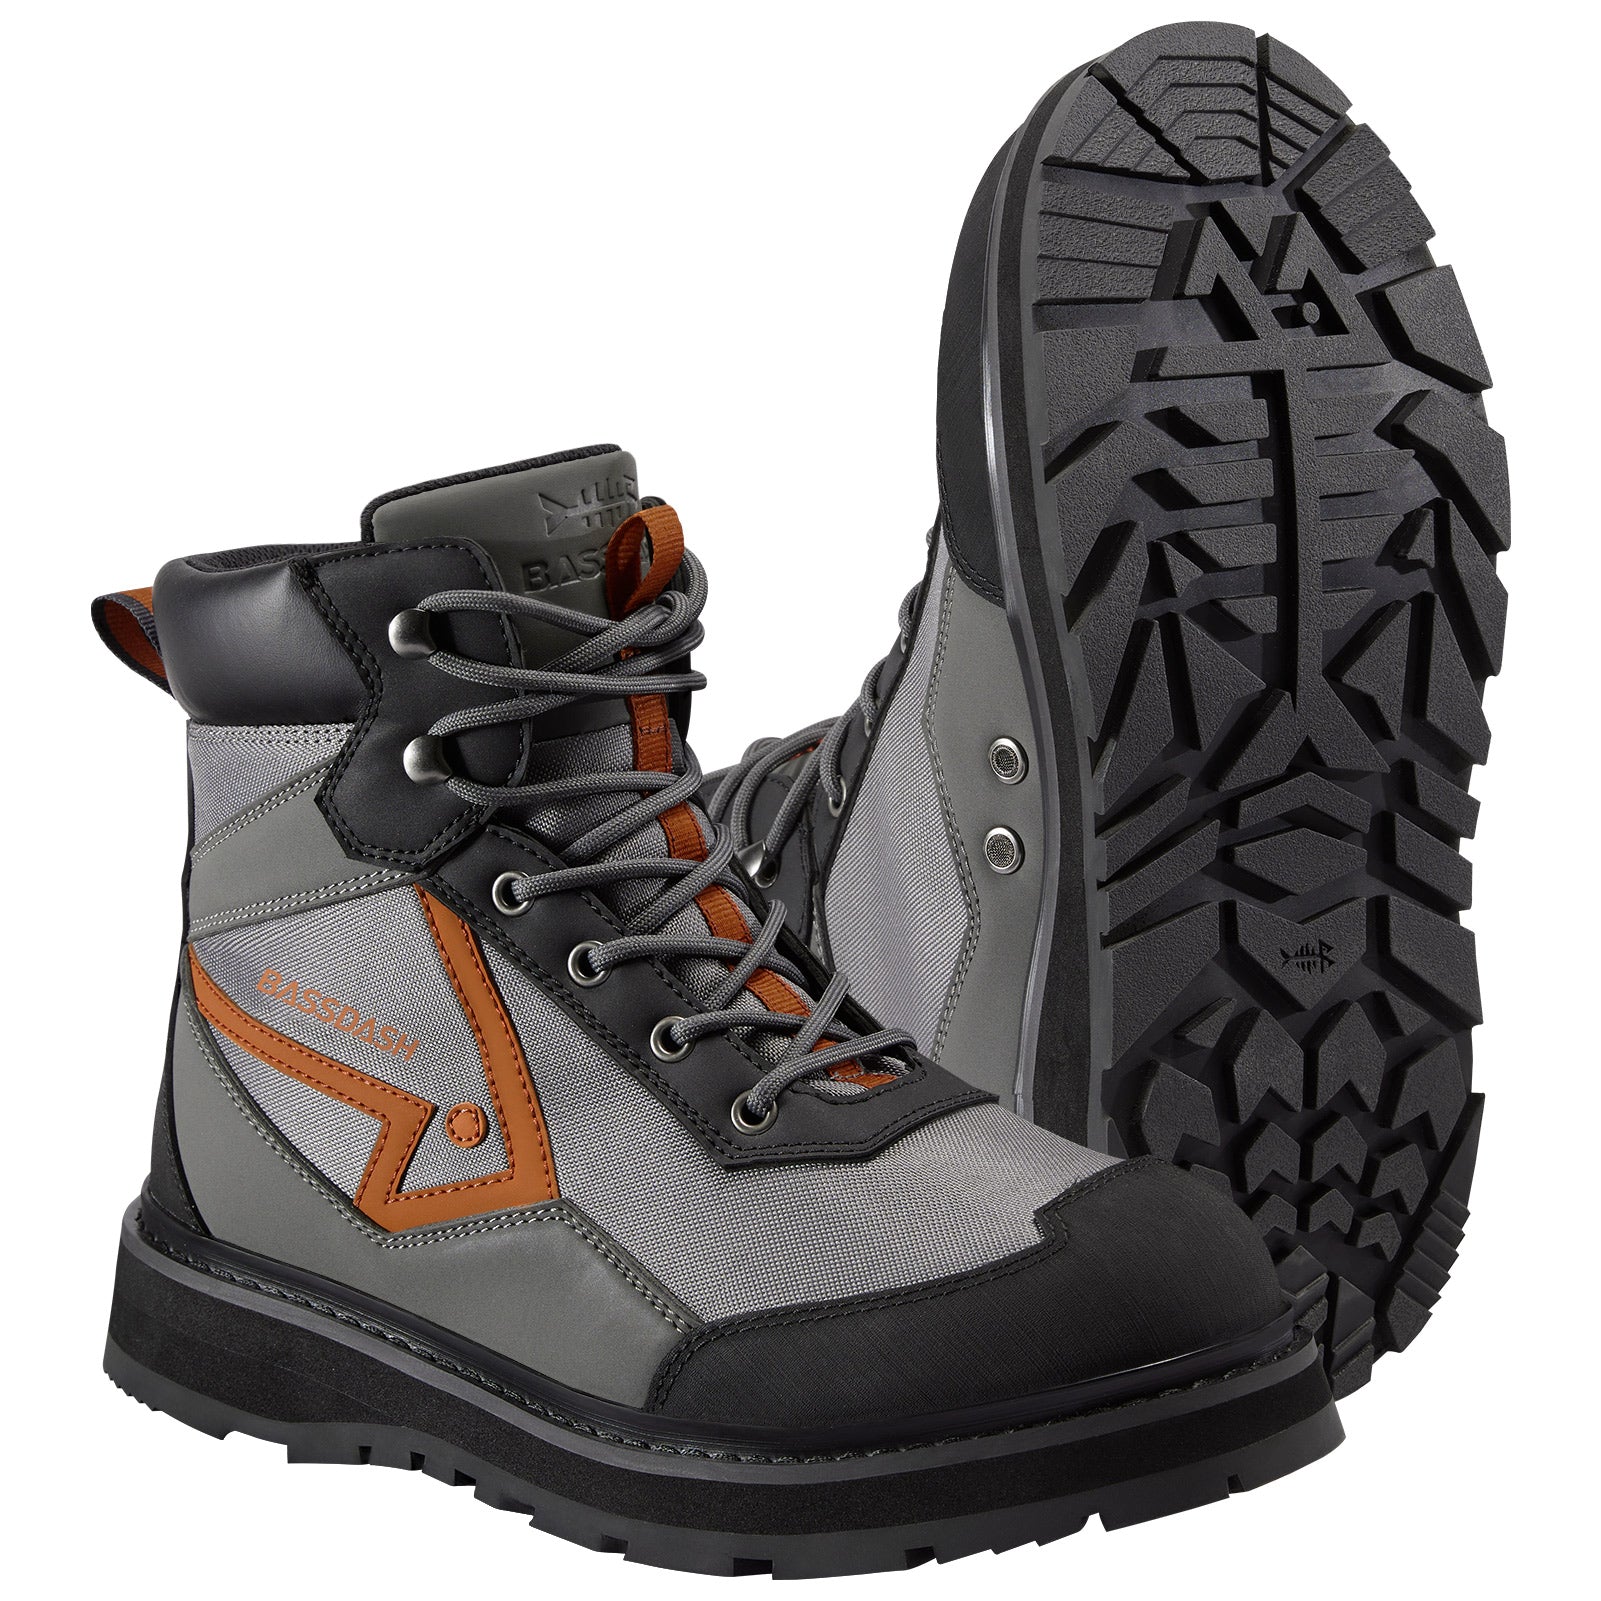 Men’s Flex Wading Boots with Rubber Sole - Black/Grey / 6